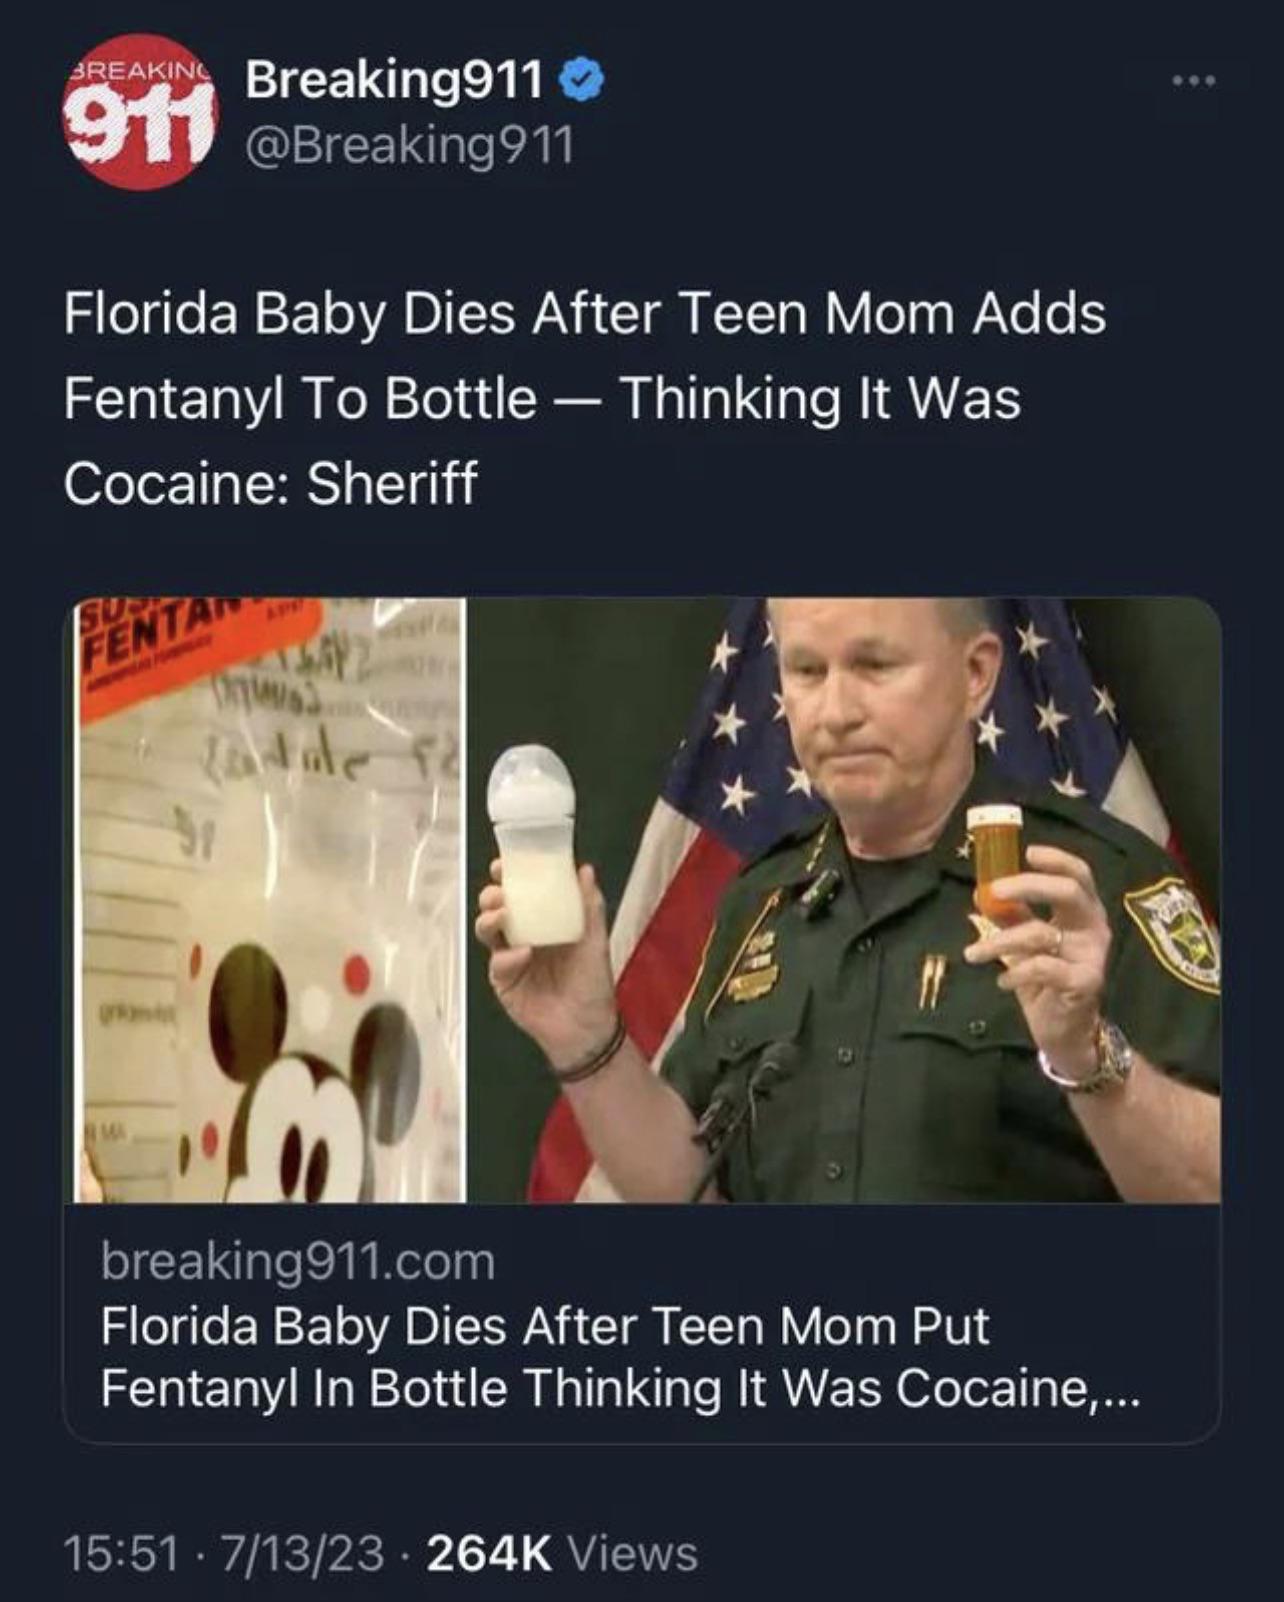 trashy people - florida baby fentanyl - Breaking Breaking911 911 911 Florida Baby Dies After Teen Mom Adds Fentanyl To Bottle Thinking It Was Cocaine Sheriff Sup Fenta breaking911.com Florida Baby Dies After Teen Mom Put Fentanyl In Bottle Thinking It Was